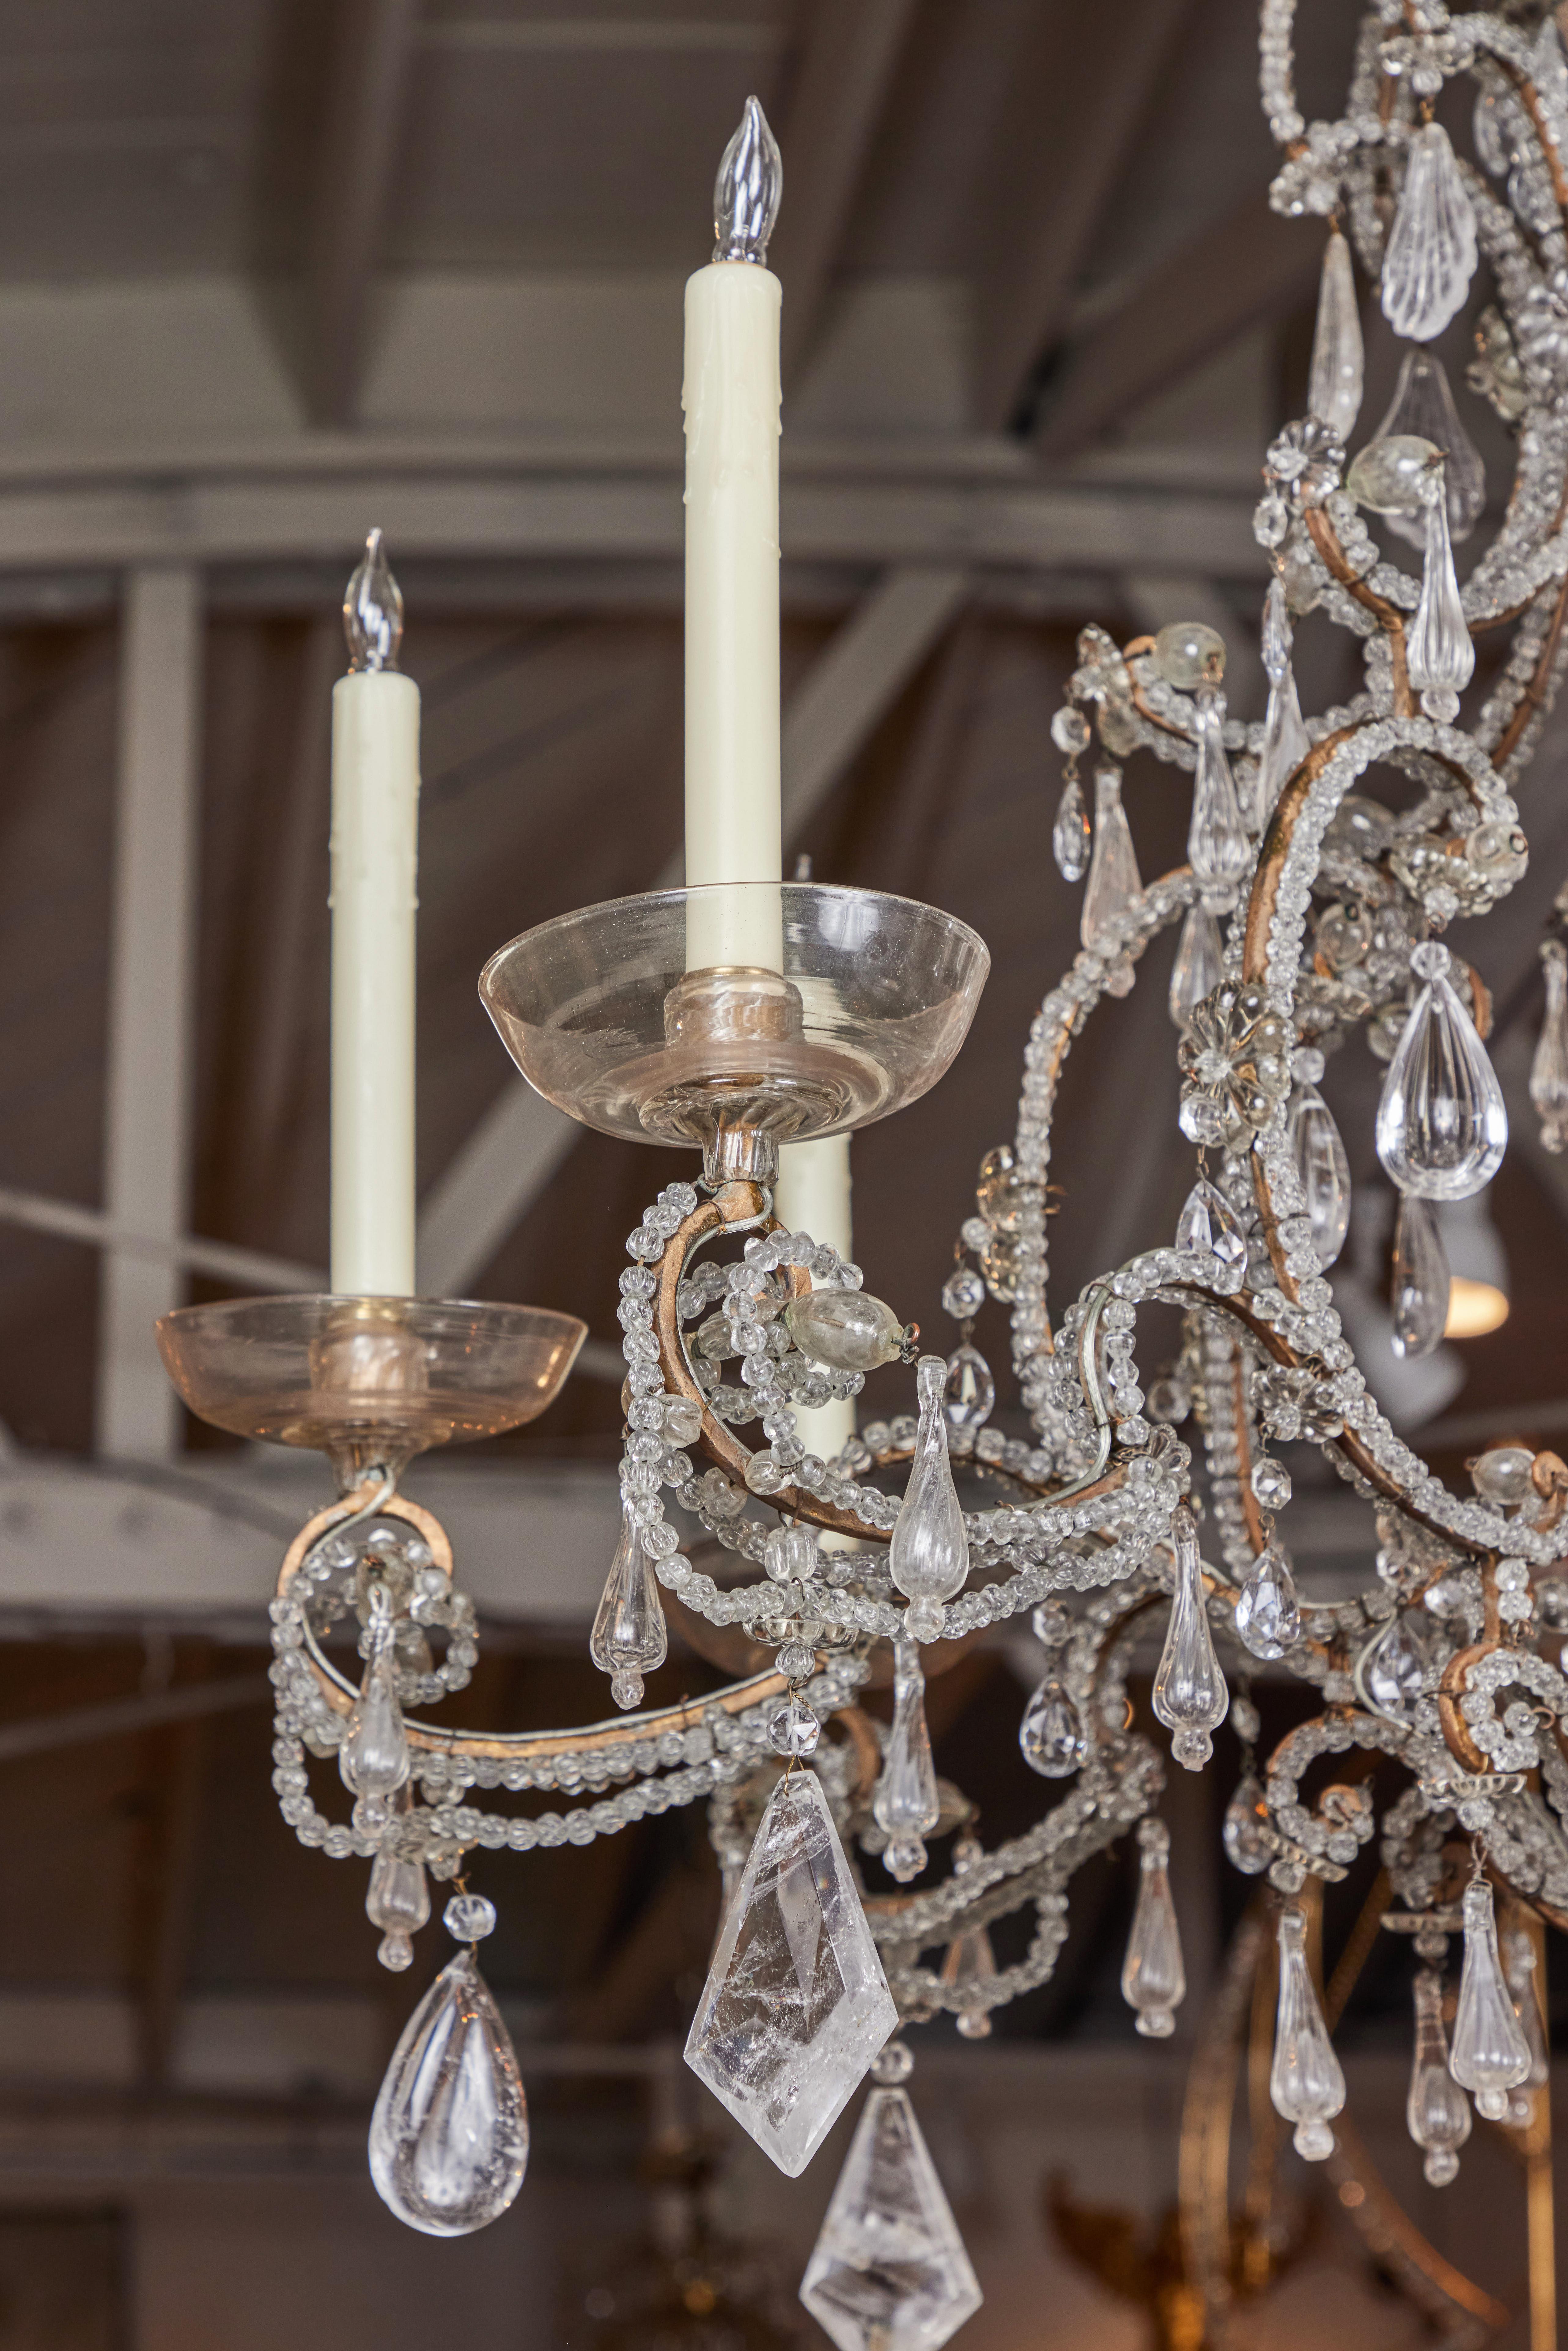 A c. 1880, eight-light chandelier from famed French maker, Maison Baguès whose work has been desired by discriminating collectors and decorators since the 1840's. This piece features a scrolling, gilded carriage covered in crystal beads and richly